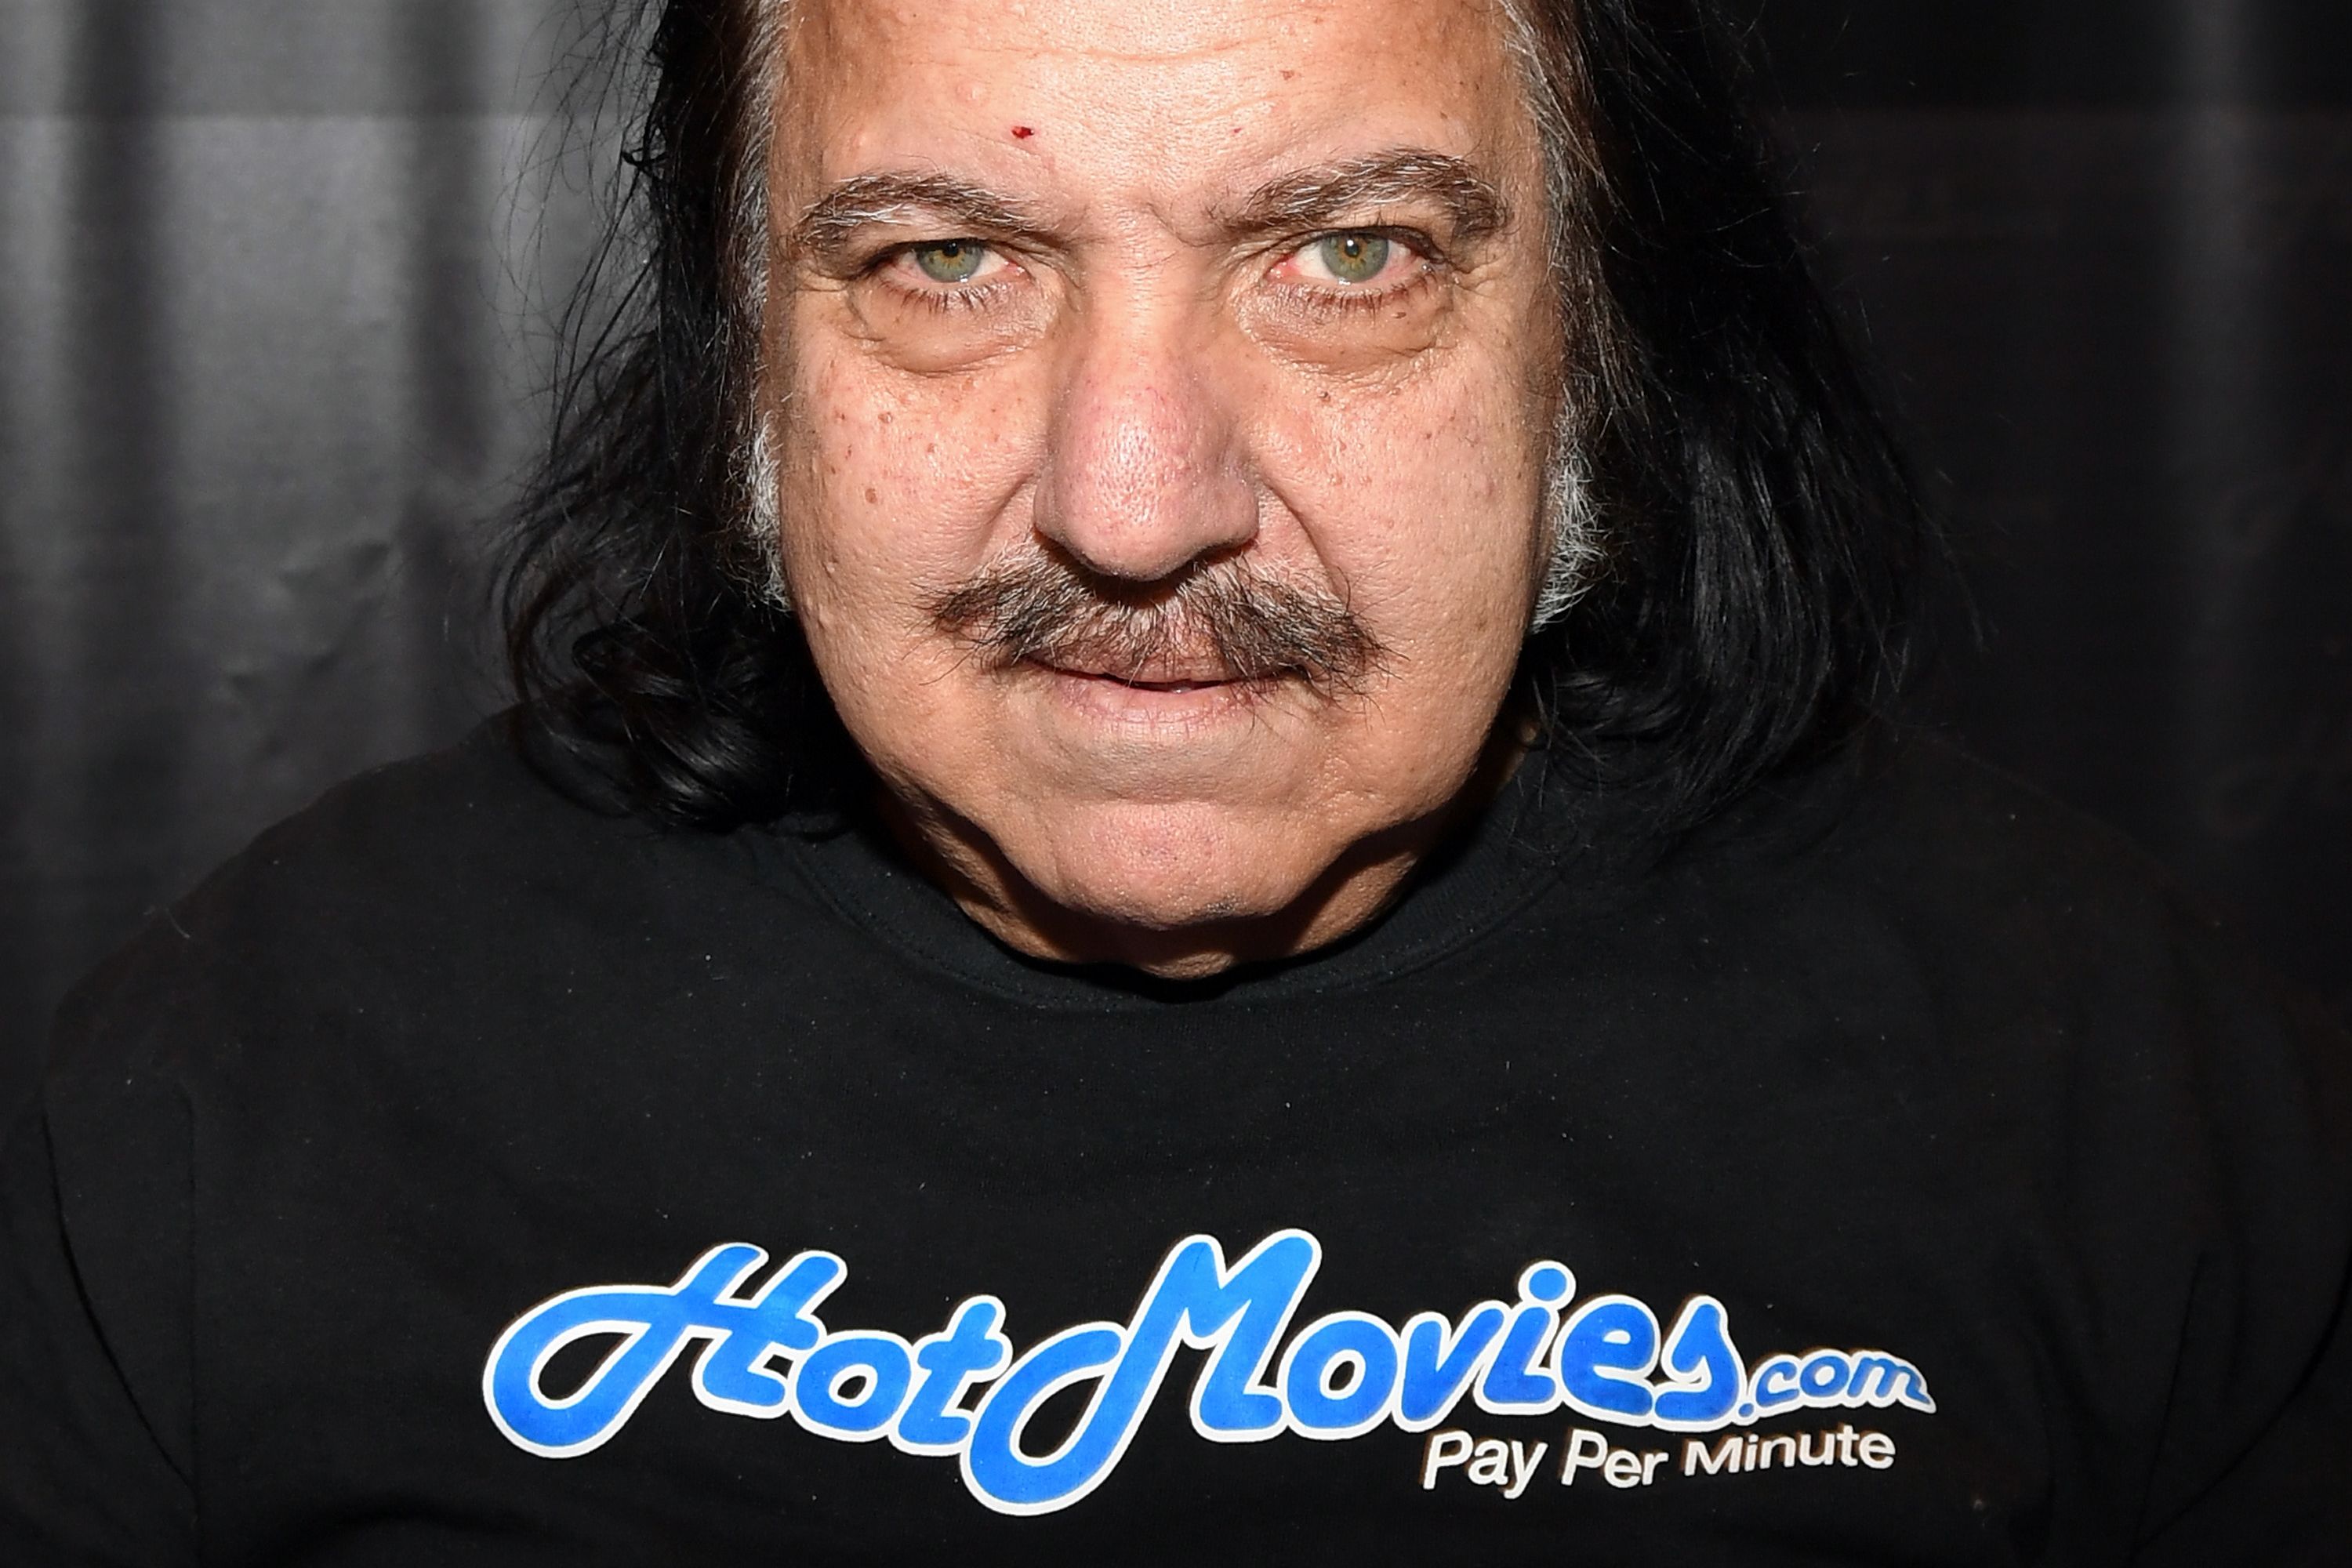 Xxx Sliping Reap Video - Porn star Ron Jeremy faces 20 more sexual assault charges | CNN